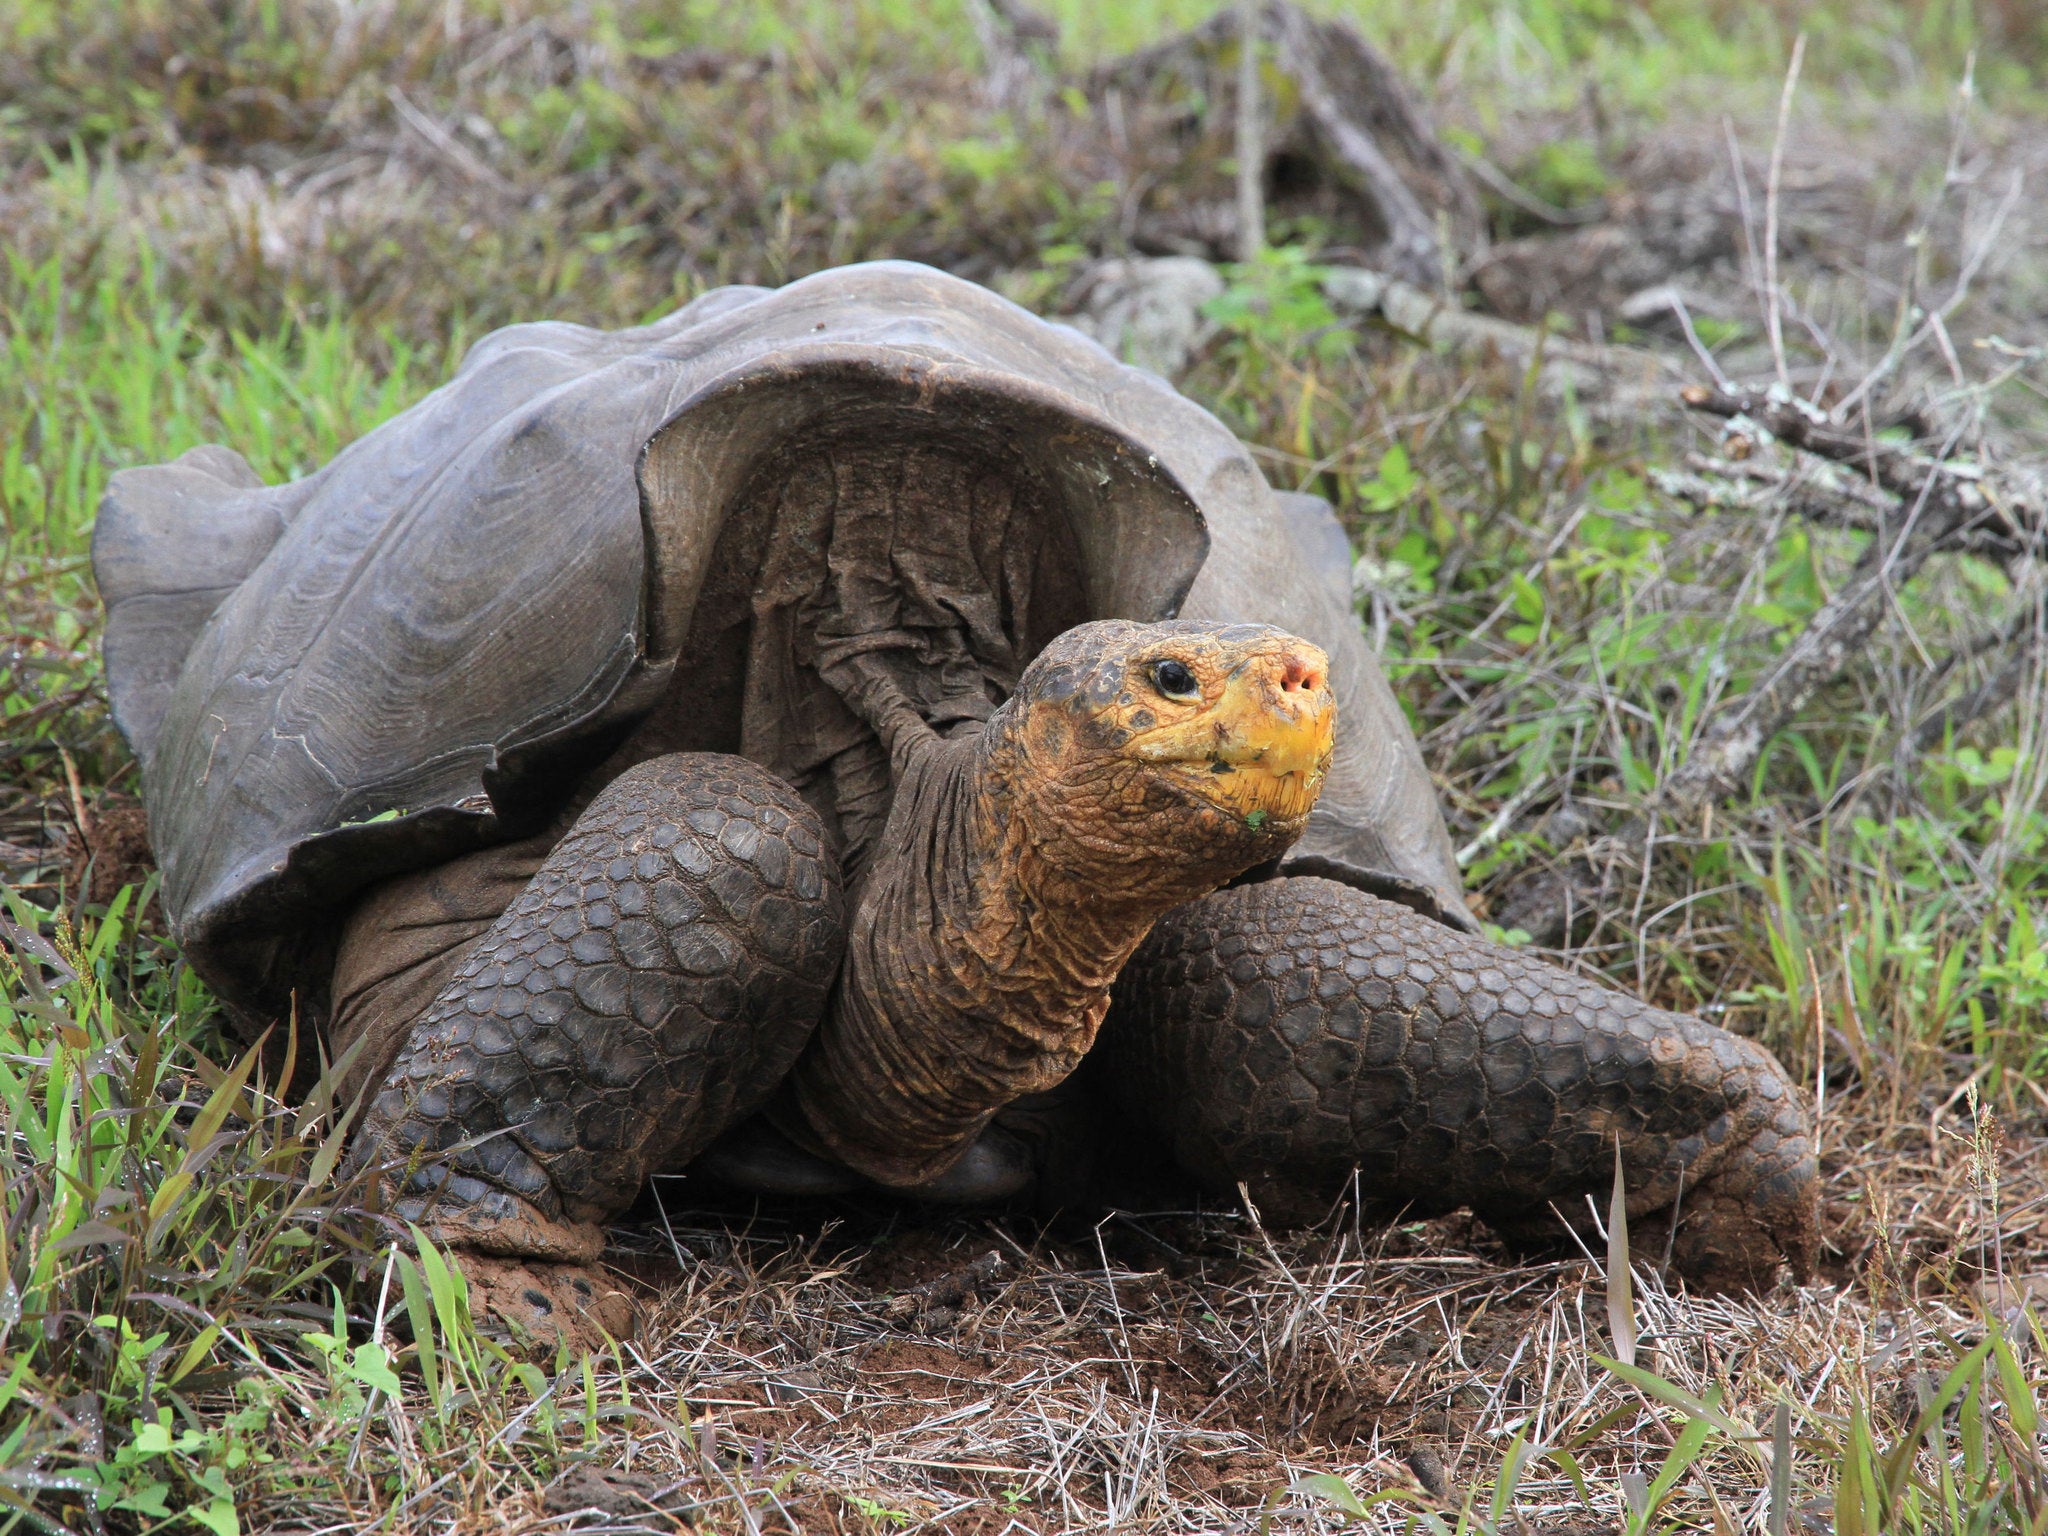 Numbers of the giant Galapagos tortoises on Espanol dwindled to just 15 in the 1960s